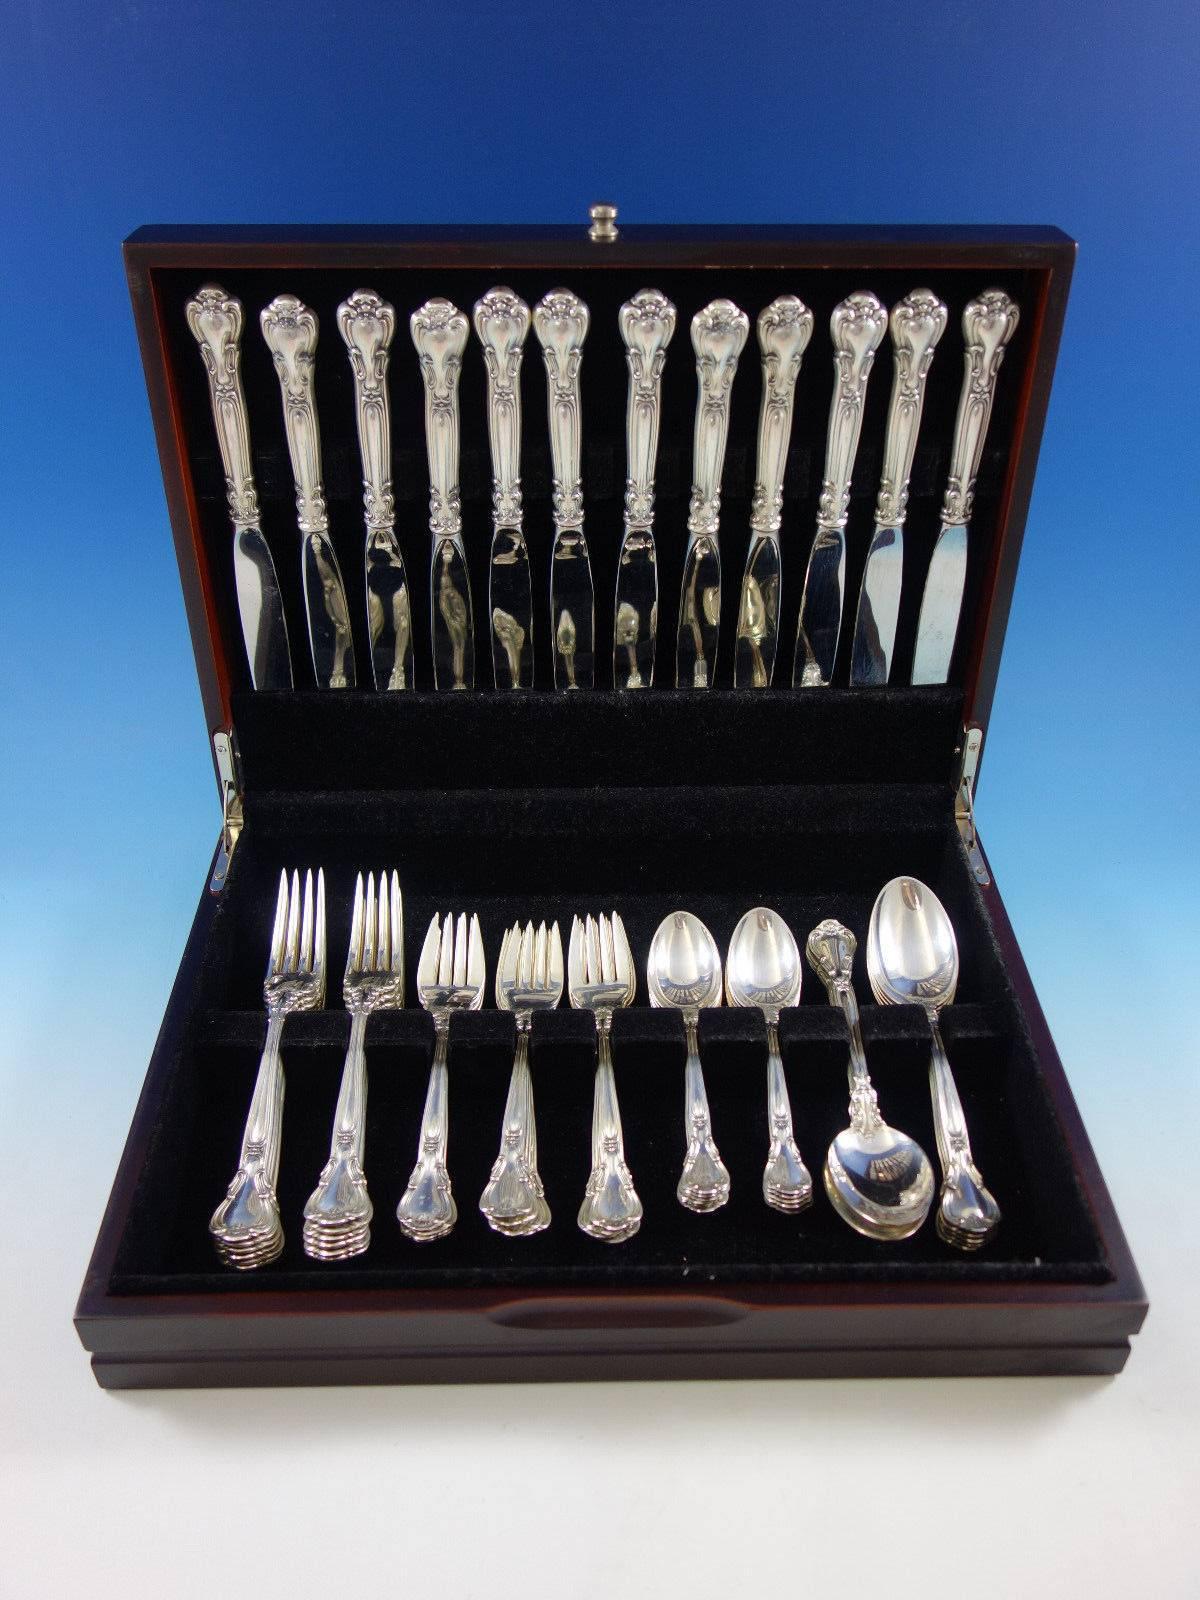 Chantilly by Gorham sterling silver flatware set, 60 pieces. This set includes: 

12 dinner size knives, 9 5/8